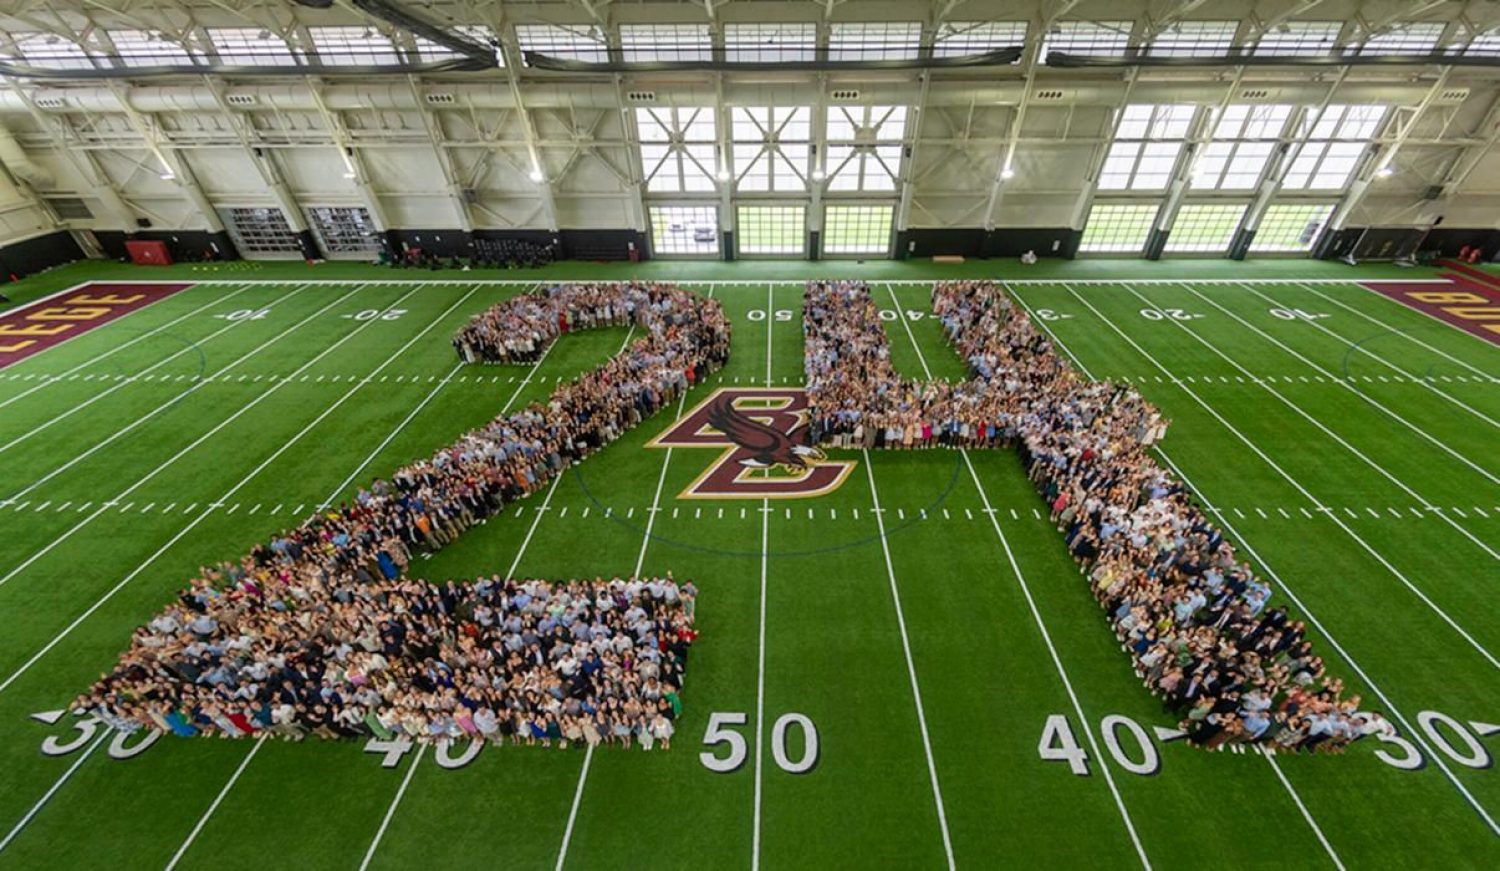 Members of the senior class pose in the shape of the number 24